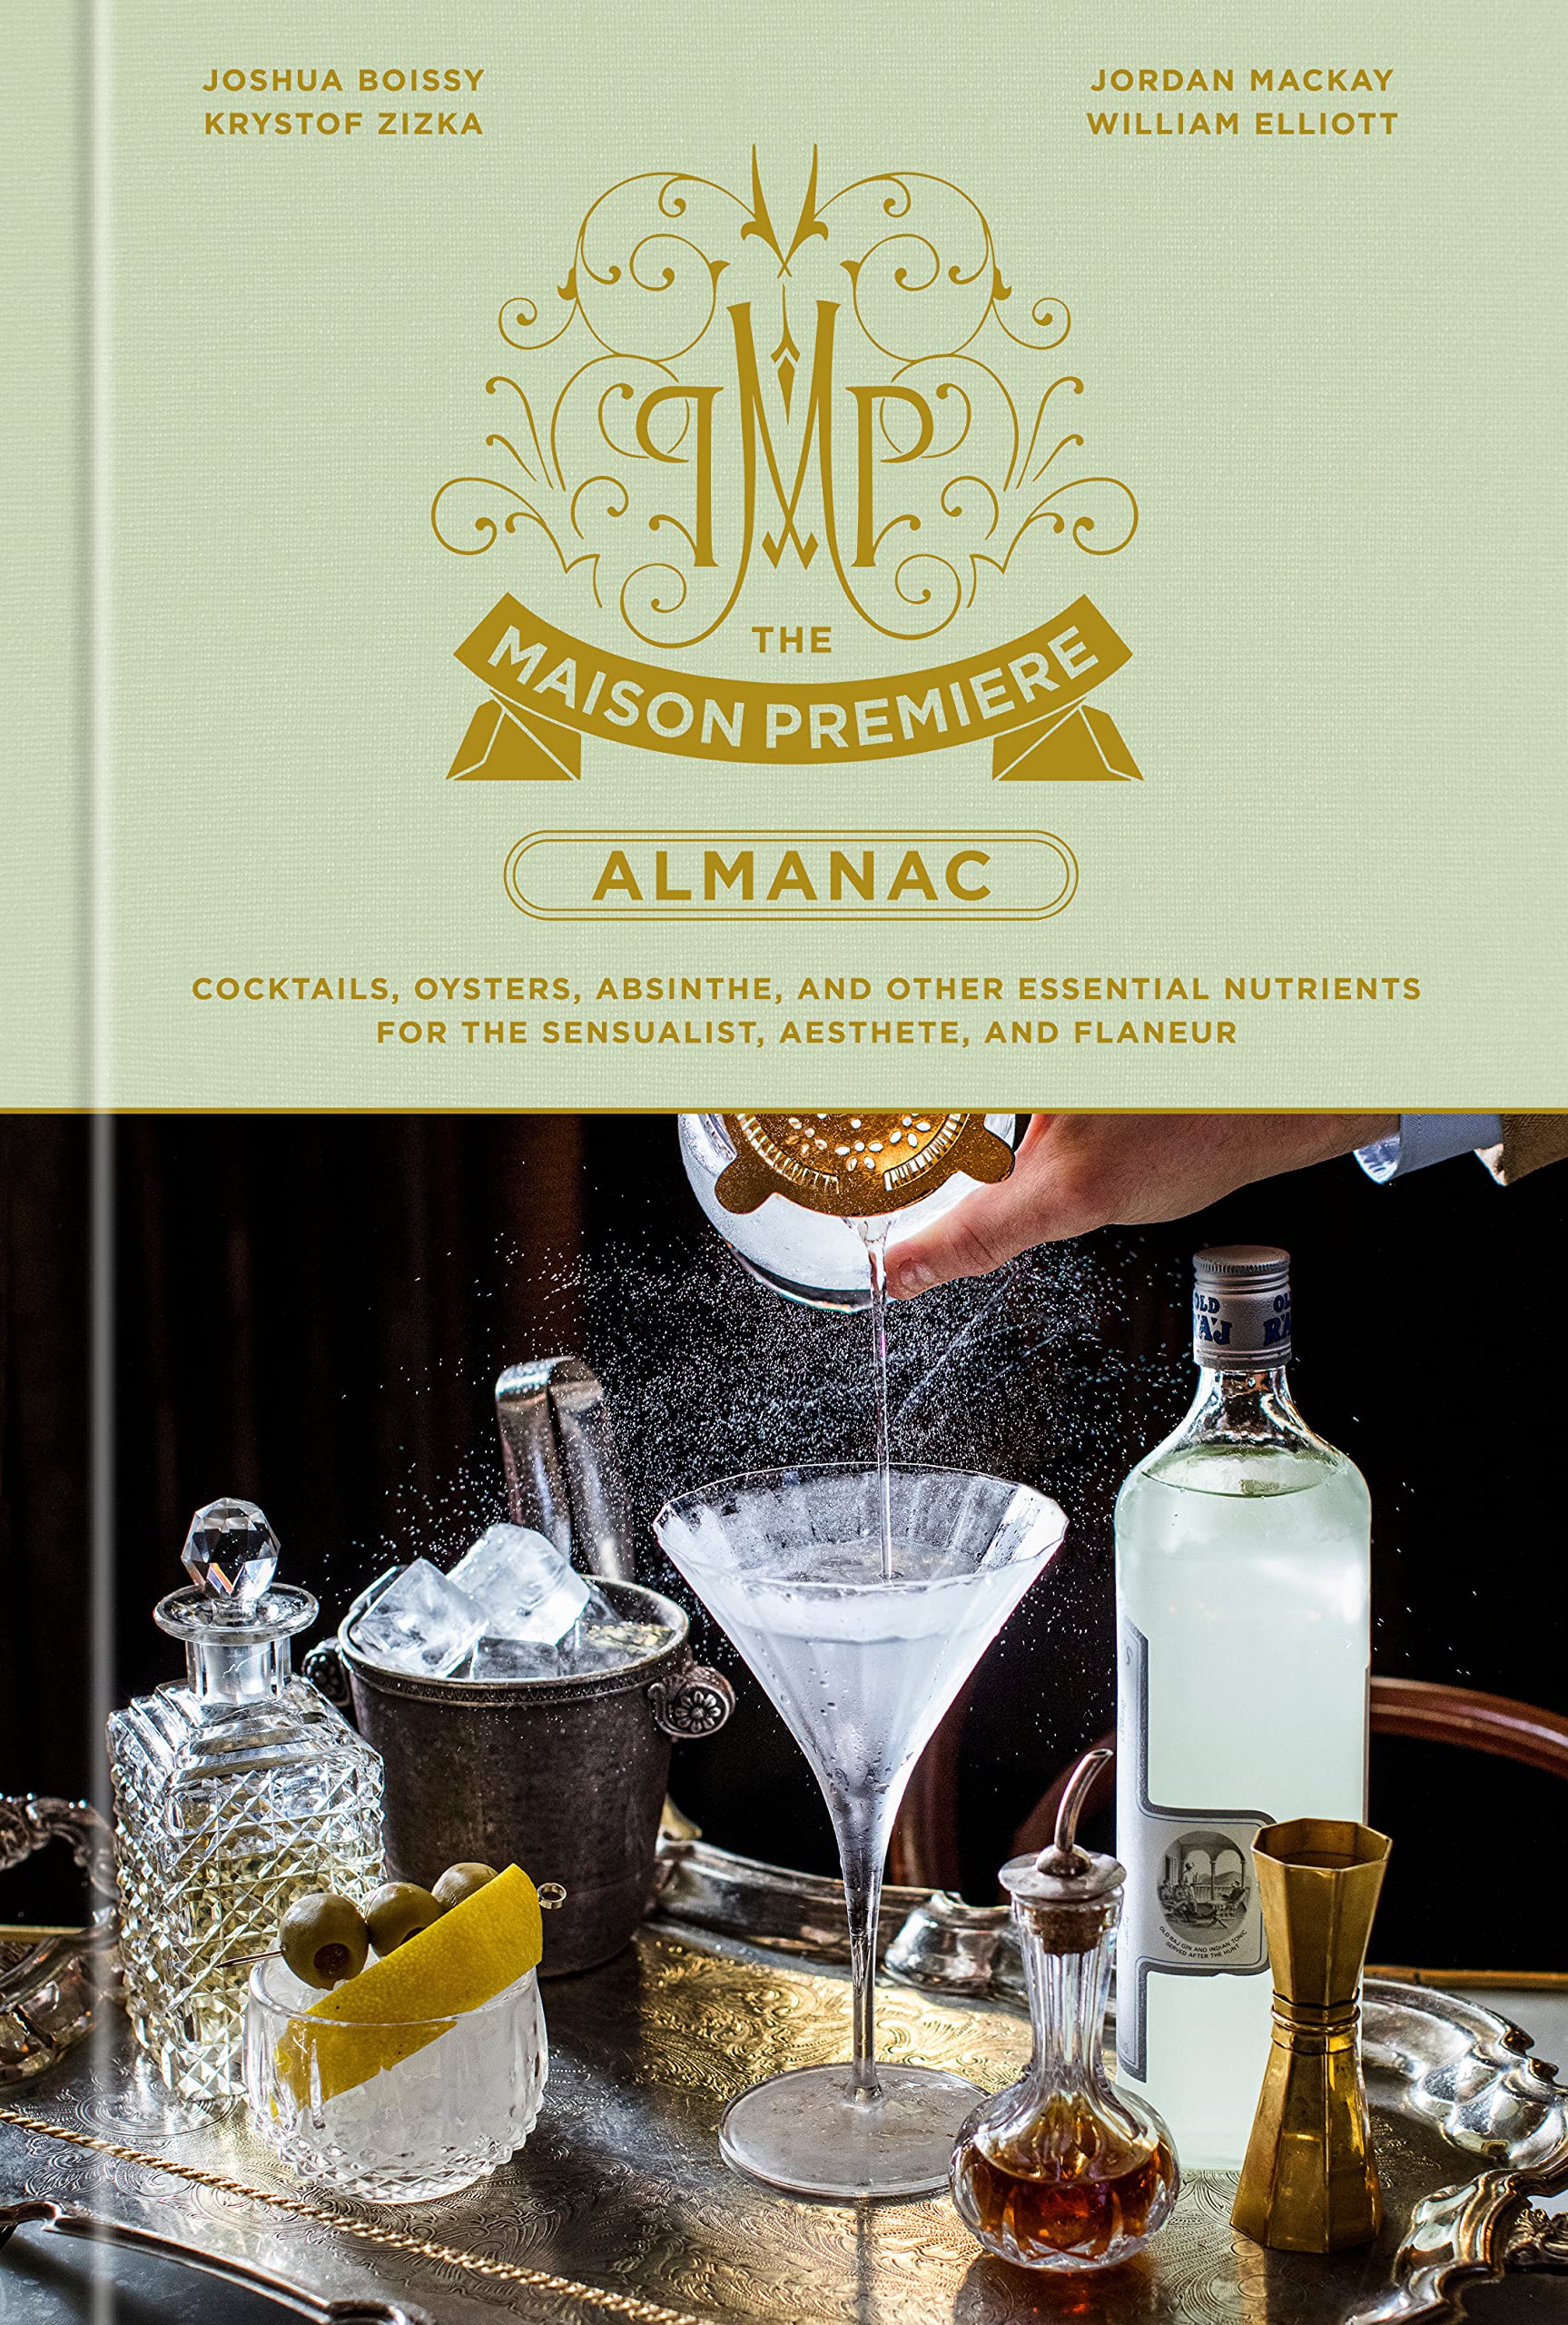 The Maison Premiere Almanac: Cocktails, Oysters, Absinthe, and Other Essential Nutrients for the Sensualist, Aesthete, and Flaneur (Joshua Boissy, Krystof Zizka, Jordan Mackay) *Signed*